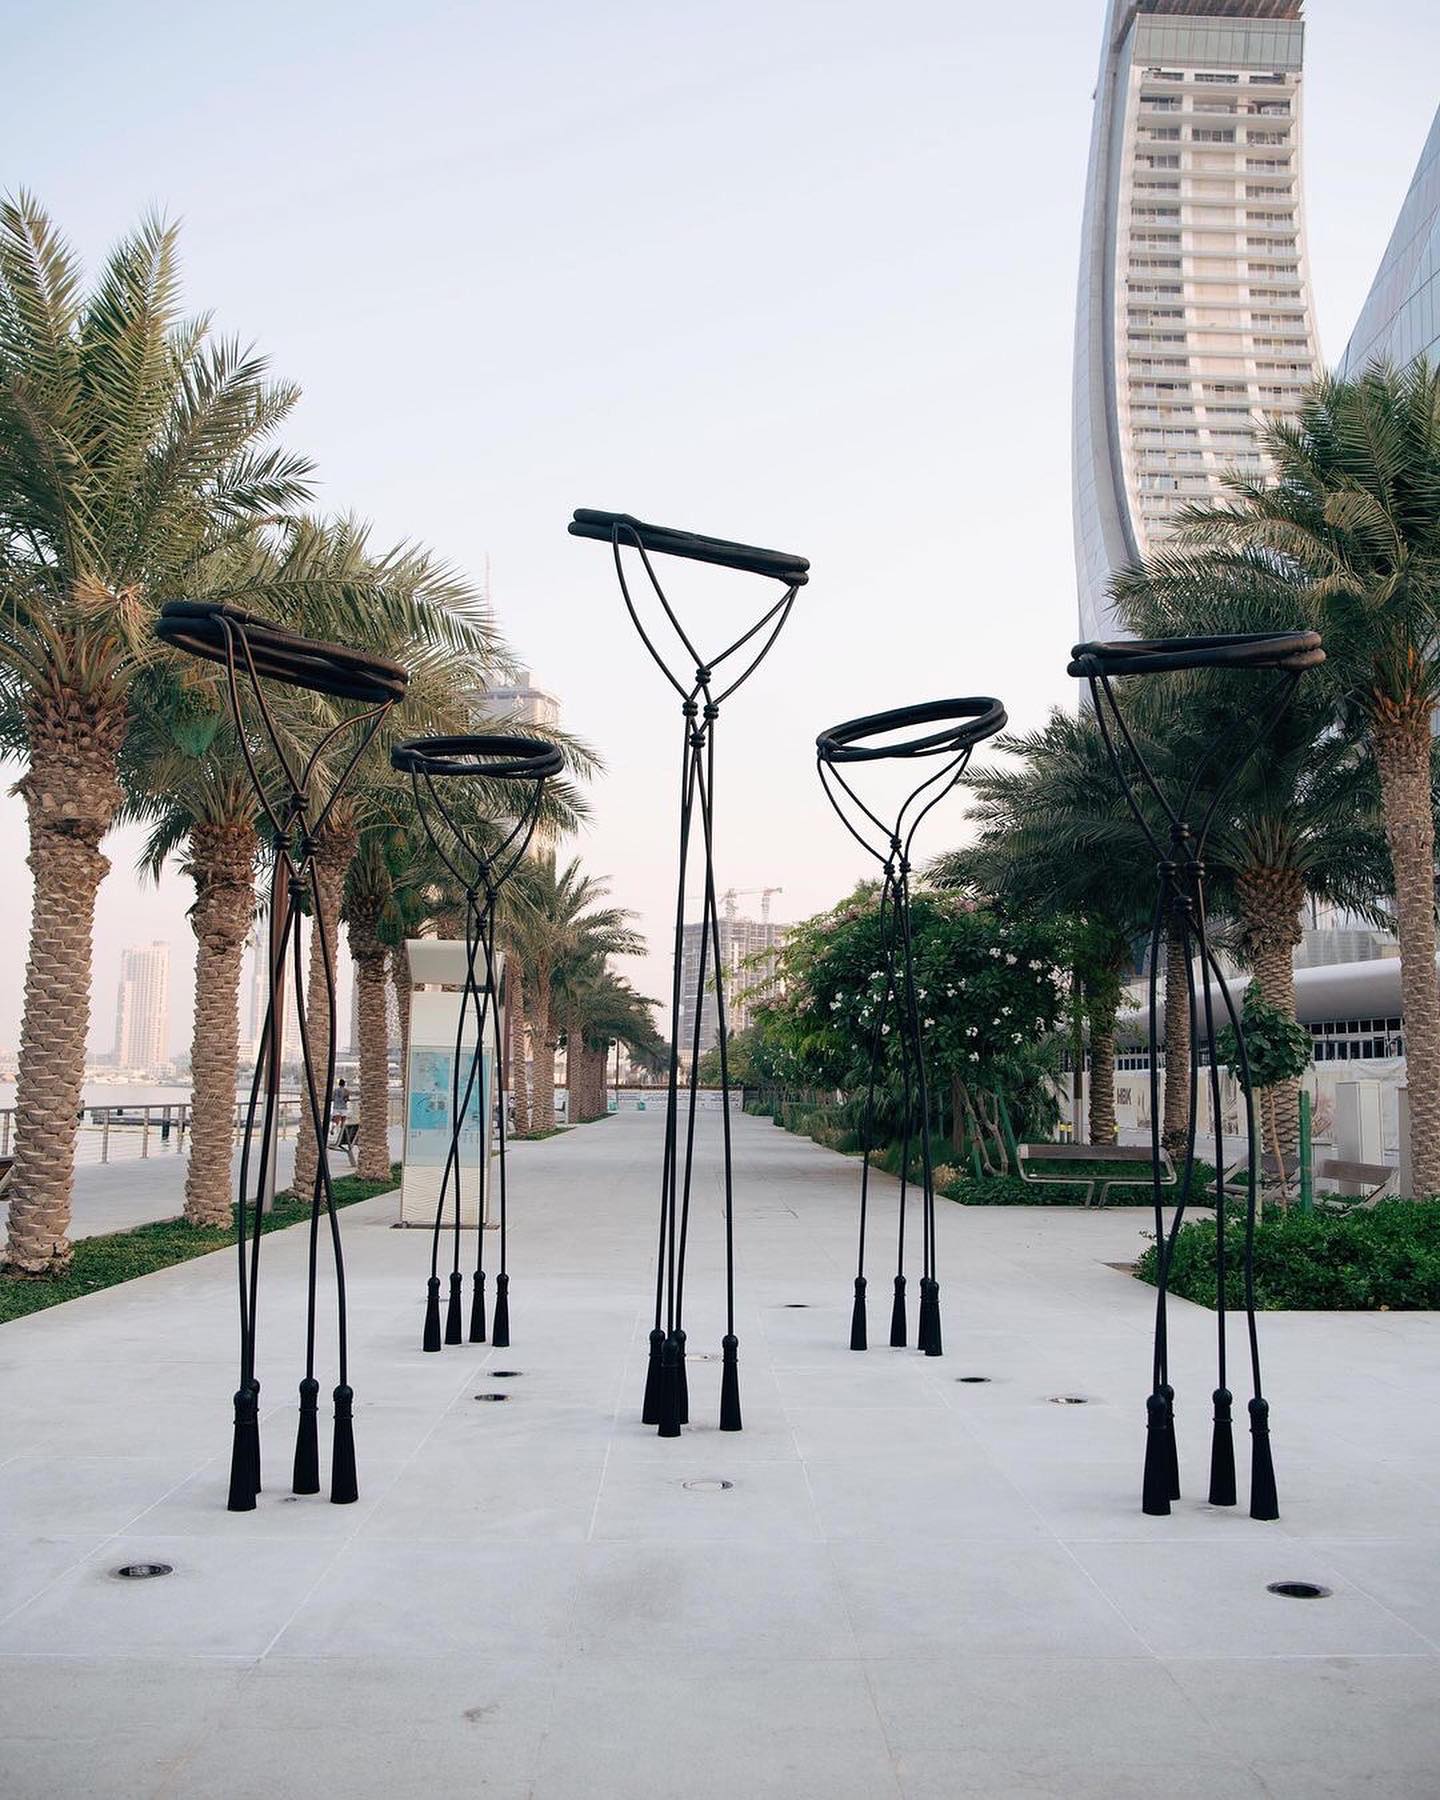 Qatar Museums Invites Artists to Submit Proposals on Public Art  